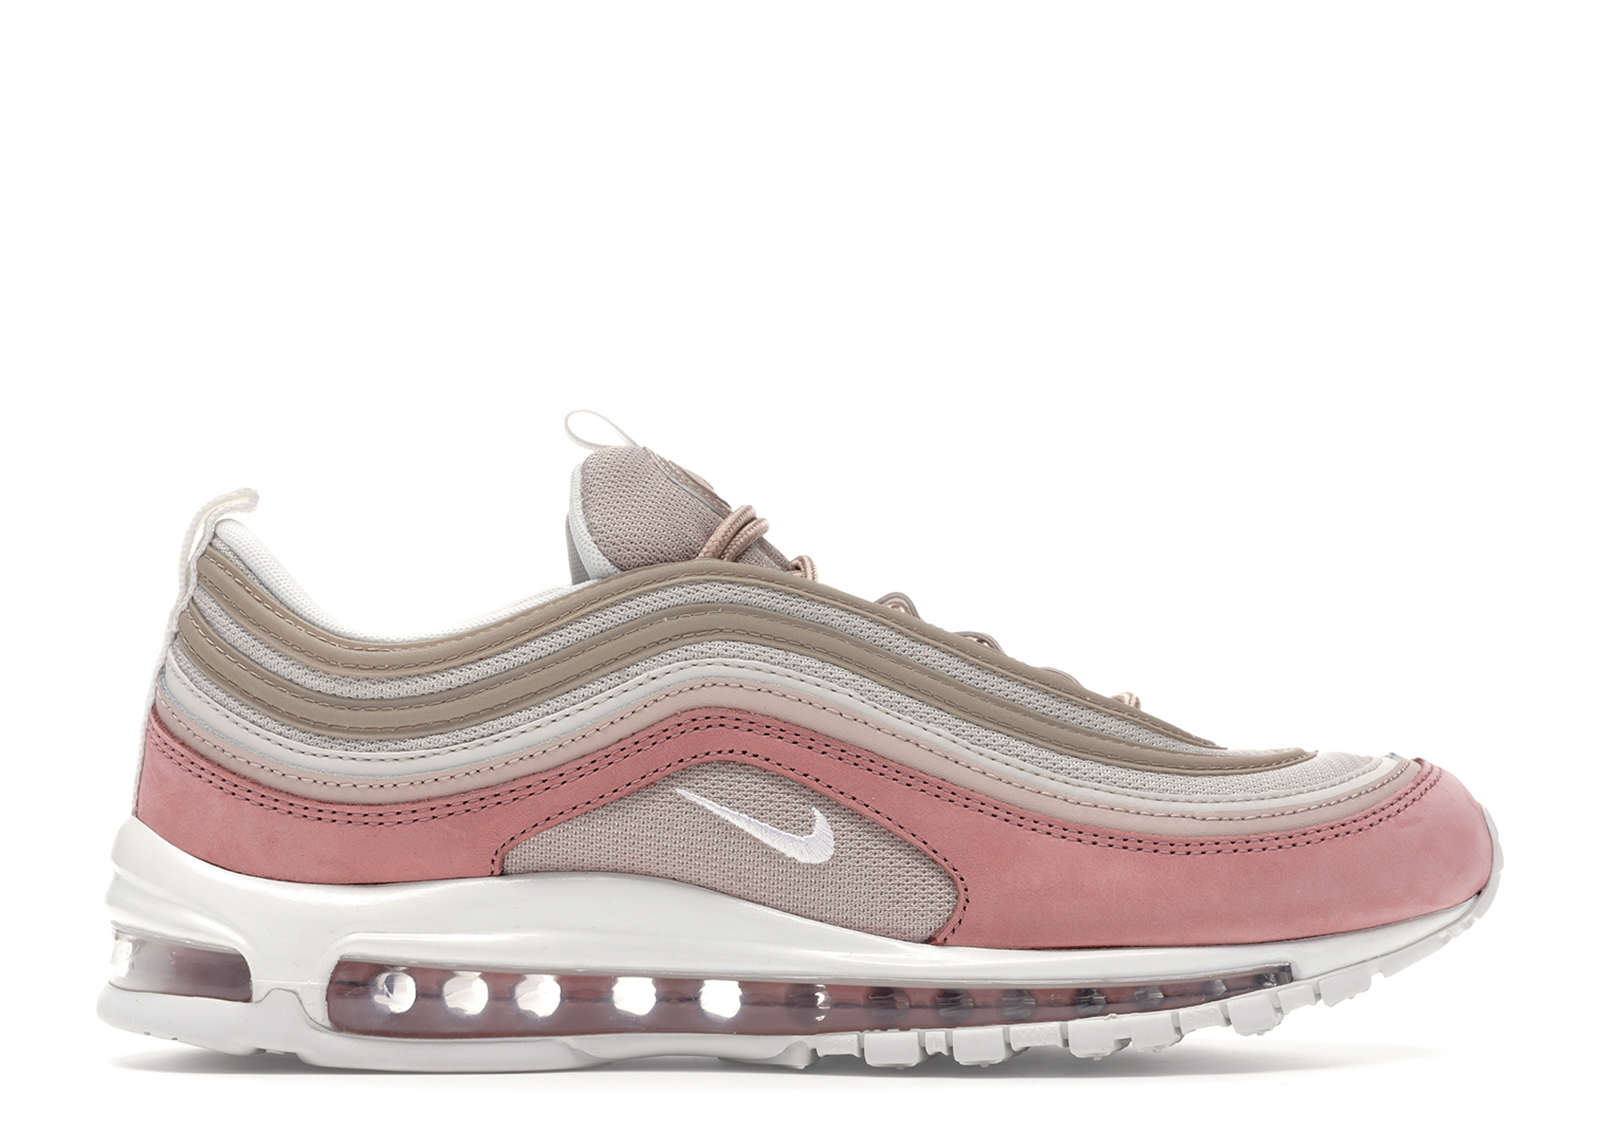 Nike Air Max 97 Particle Beige - 312834-200